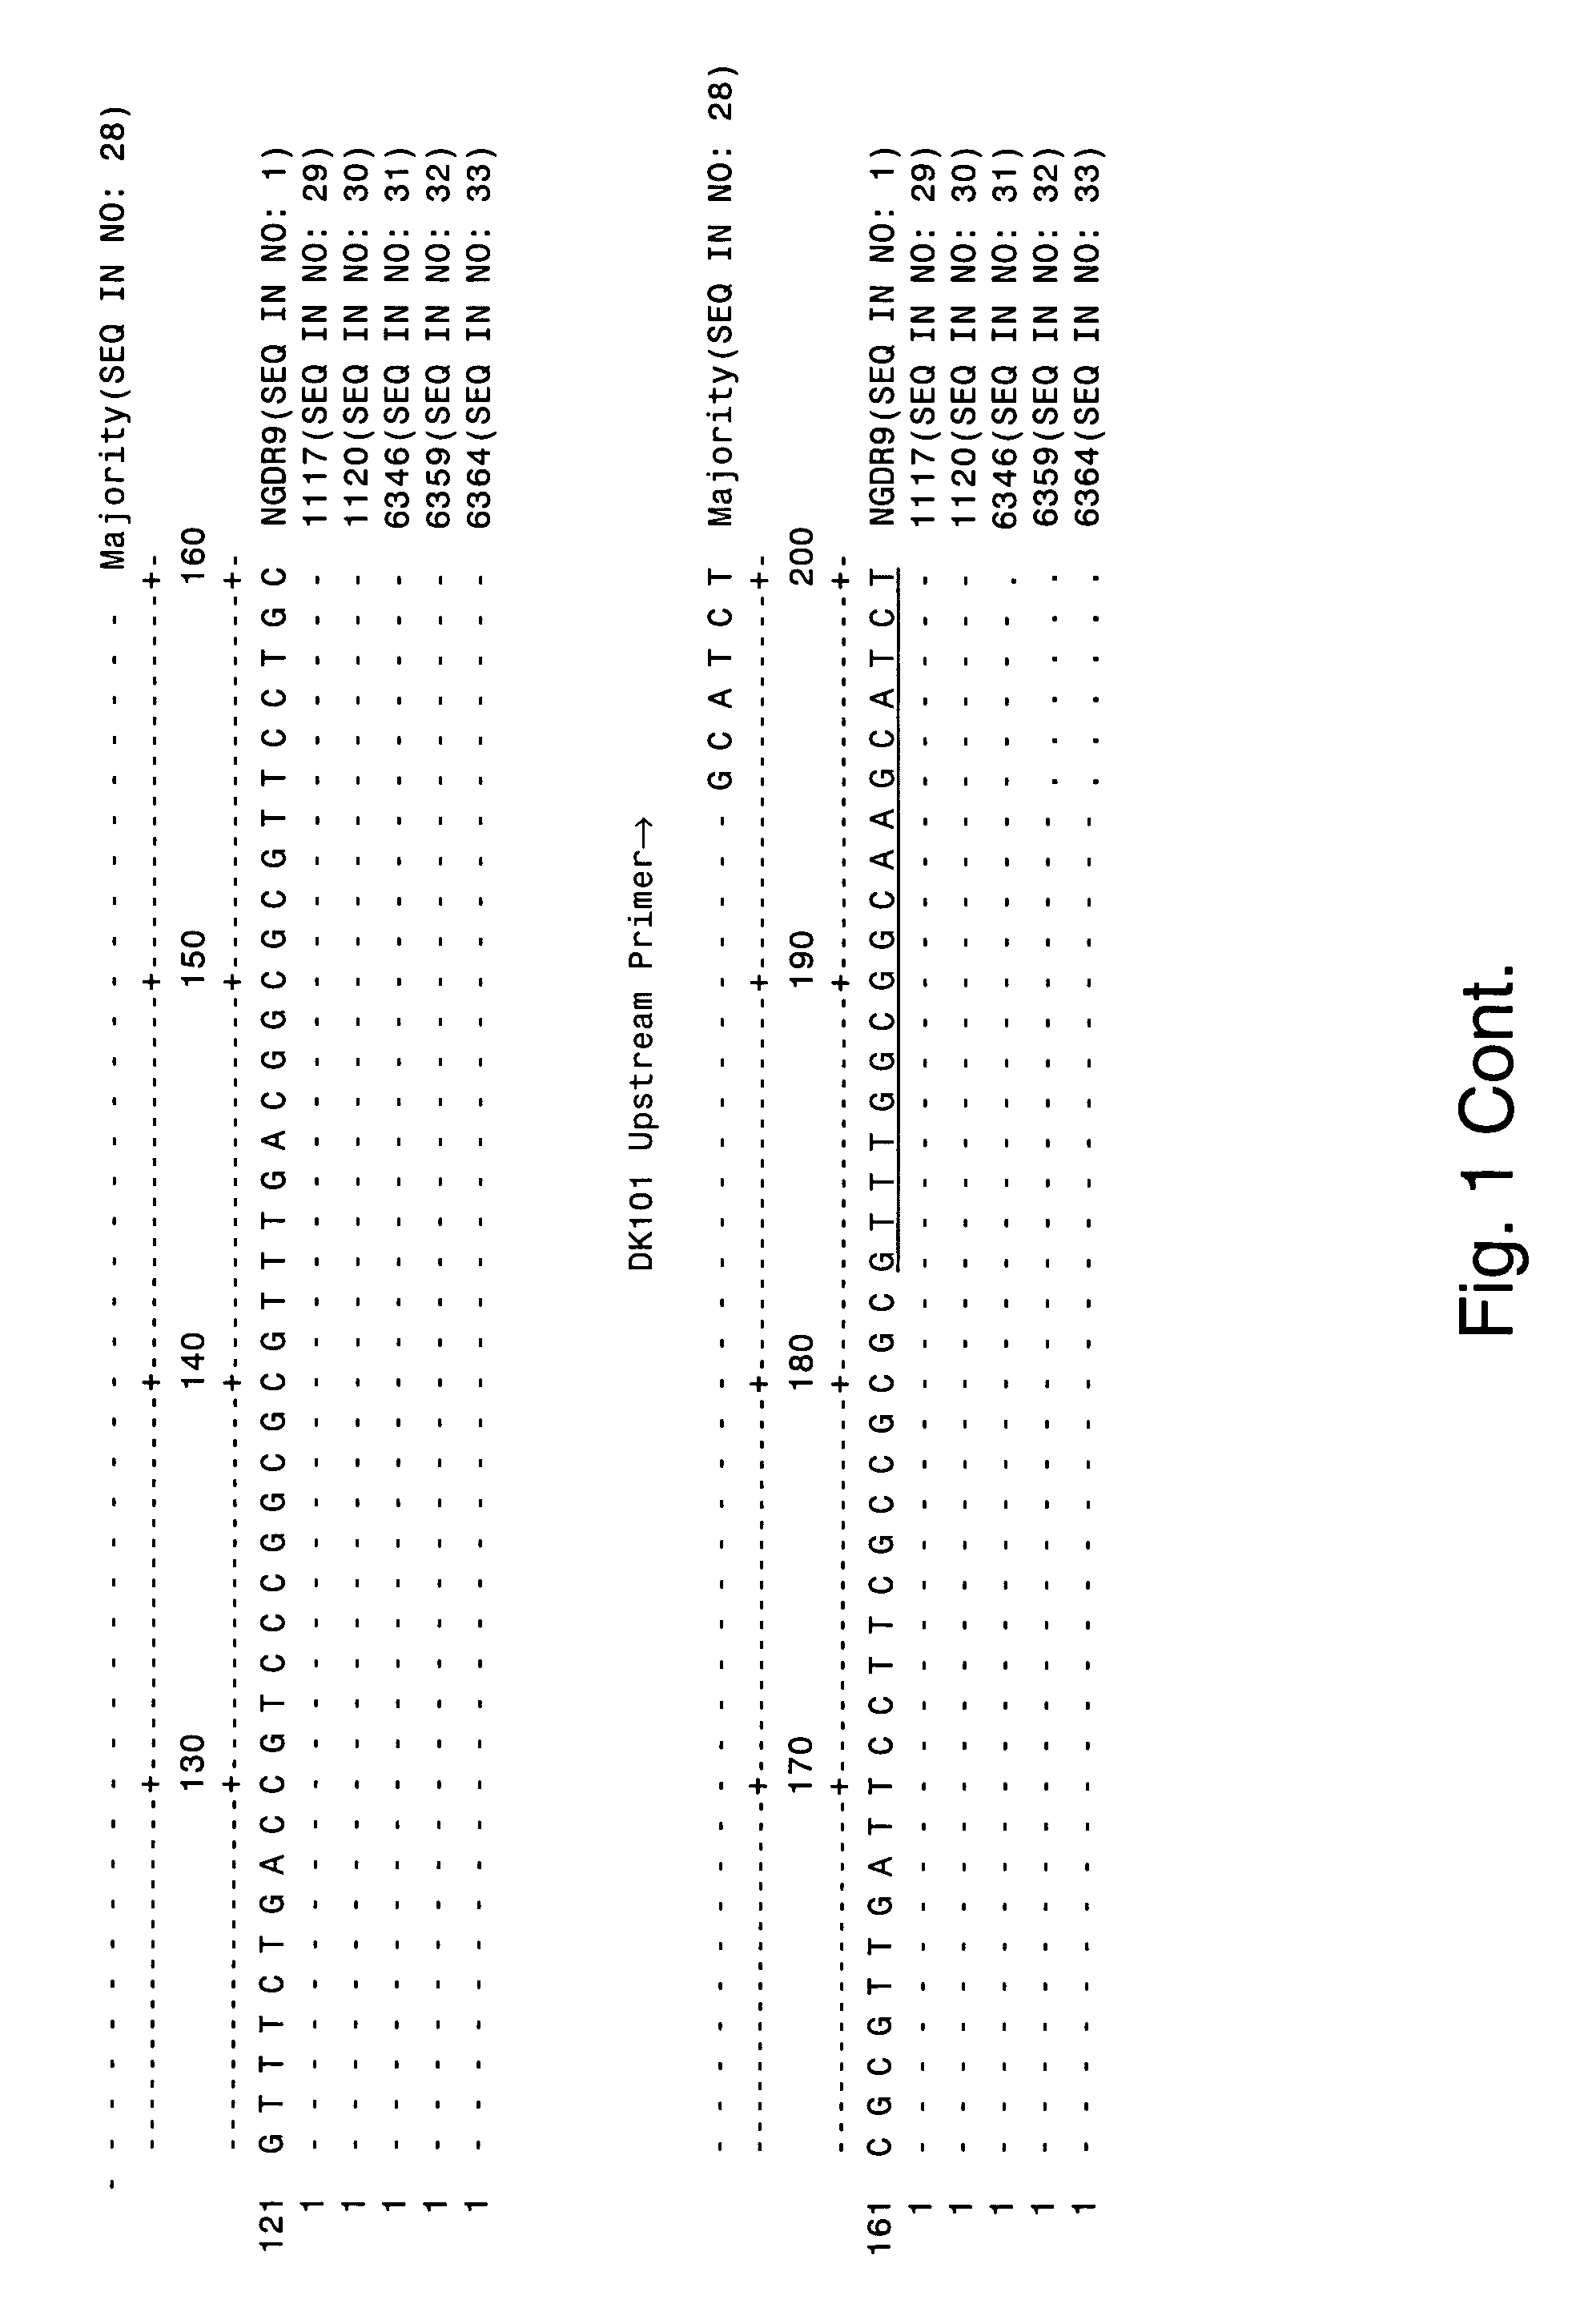 Reagents and methods for detecting Neisseria gonorrhoeae